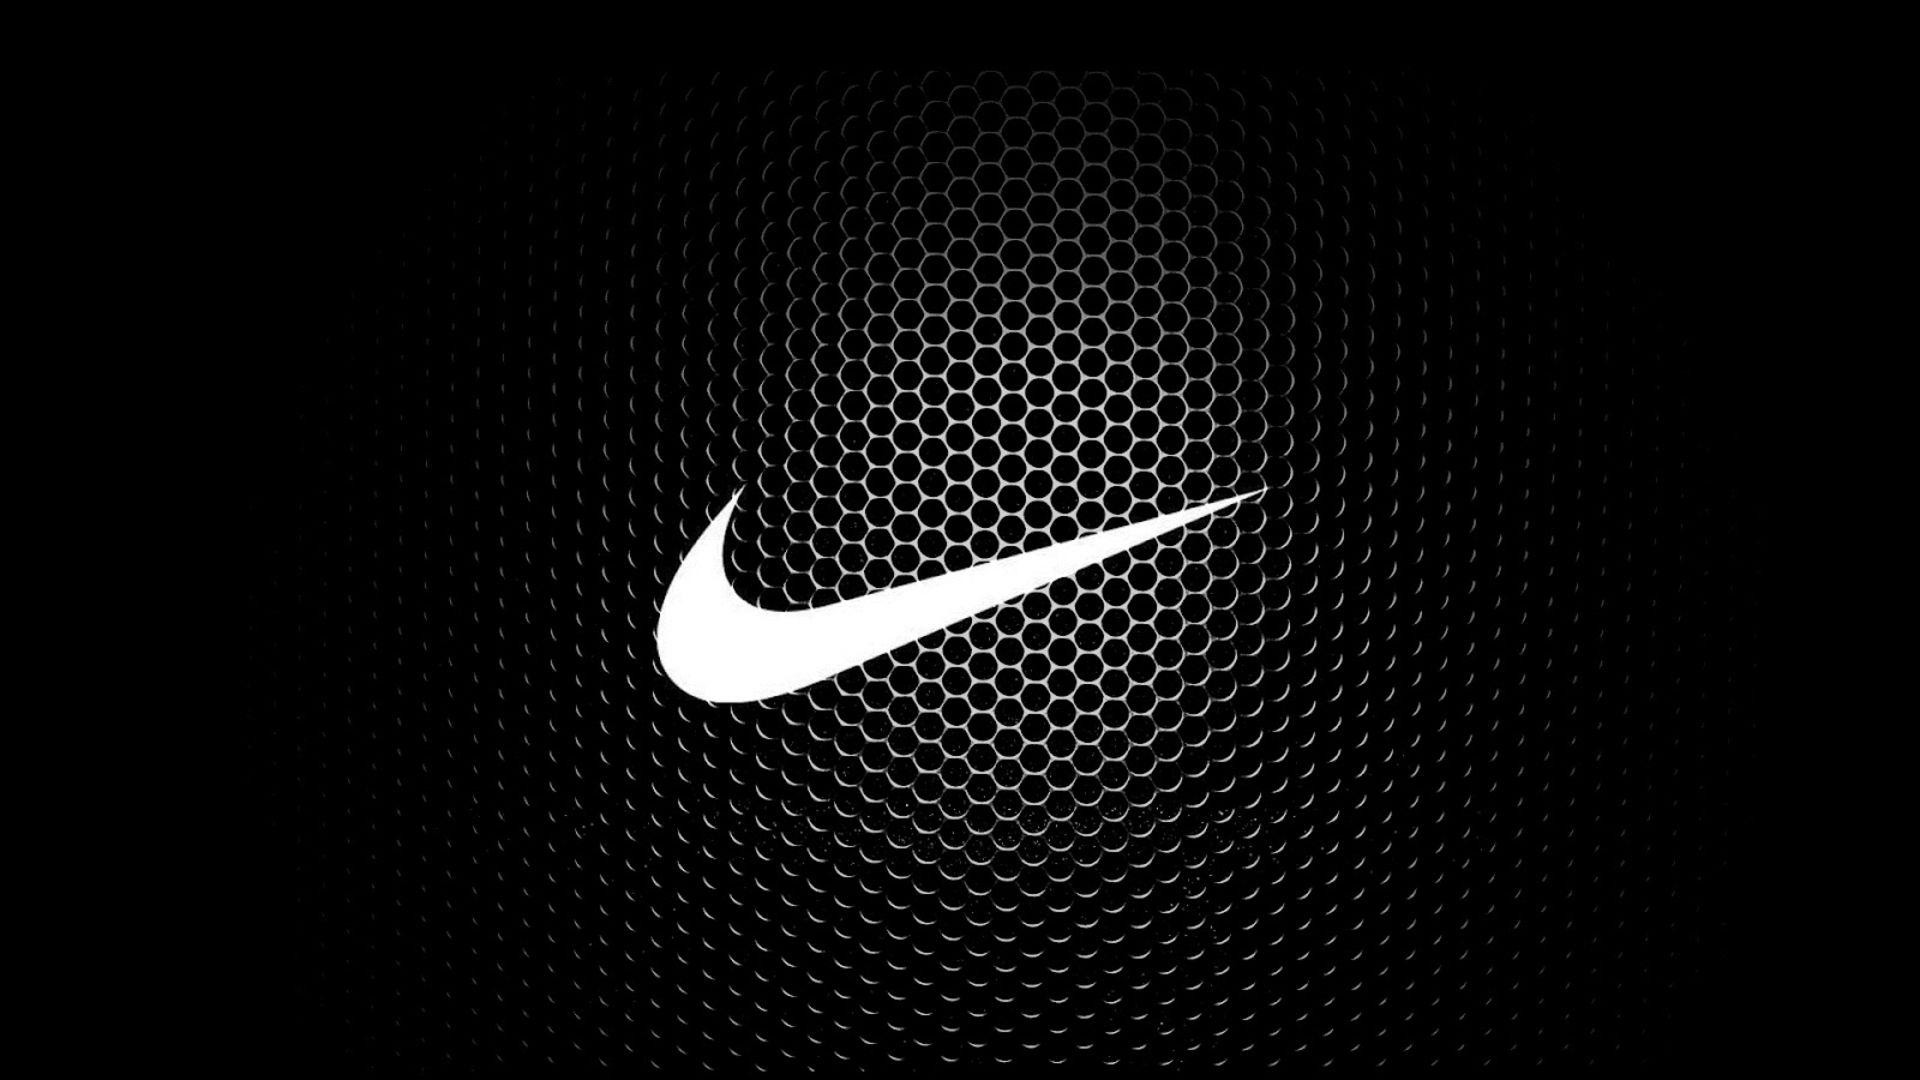 1920x1080 1378724 Nike wallpaper HD free wallpapers backgrounds images FHD .